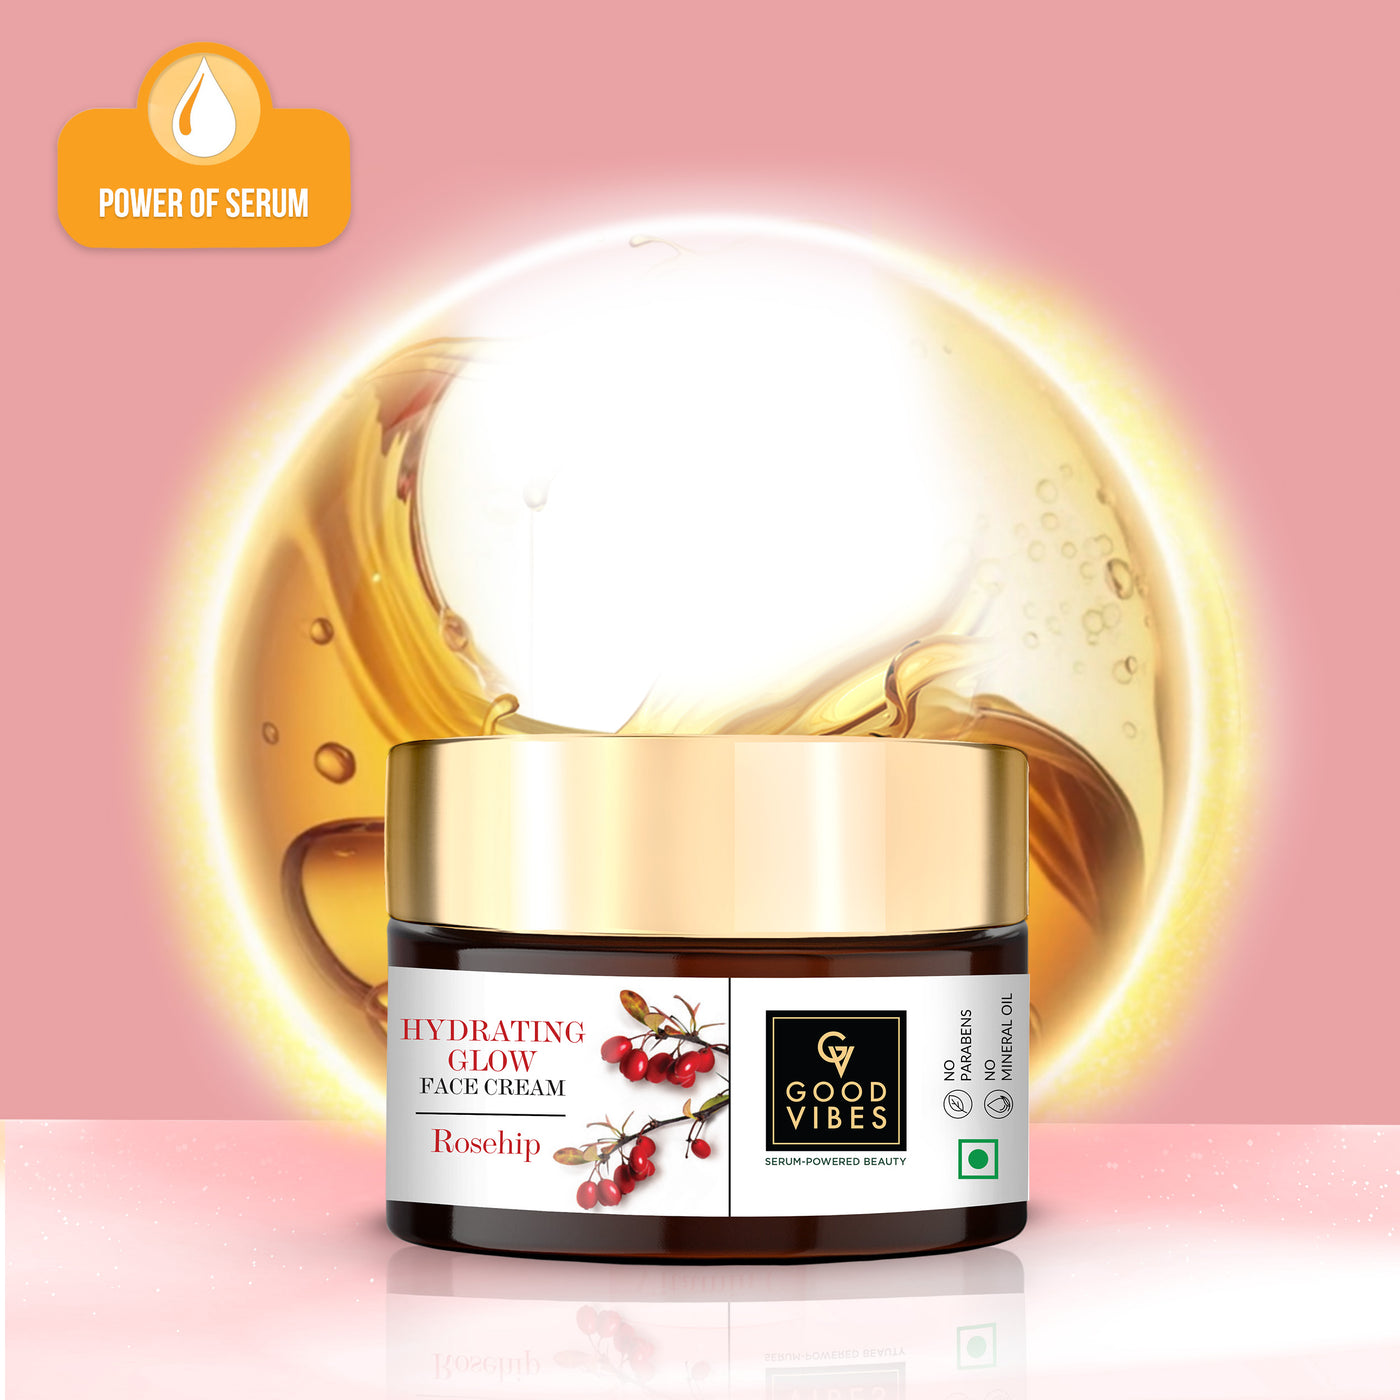 Rosehip Hydrating Glow Face Cream with Power of Serum